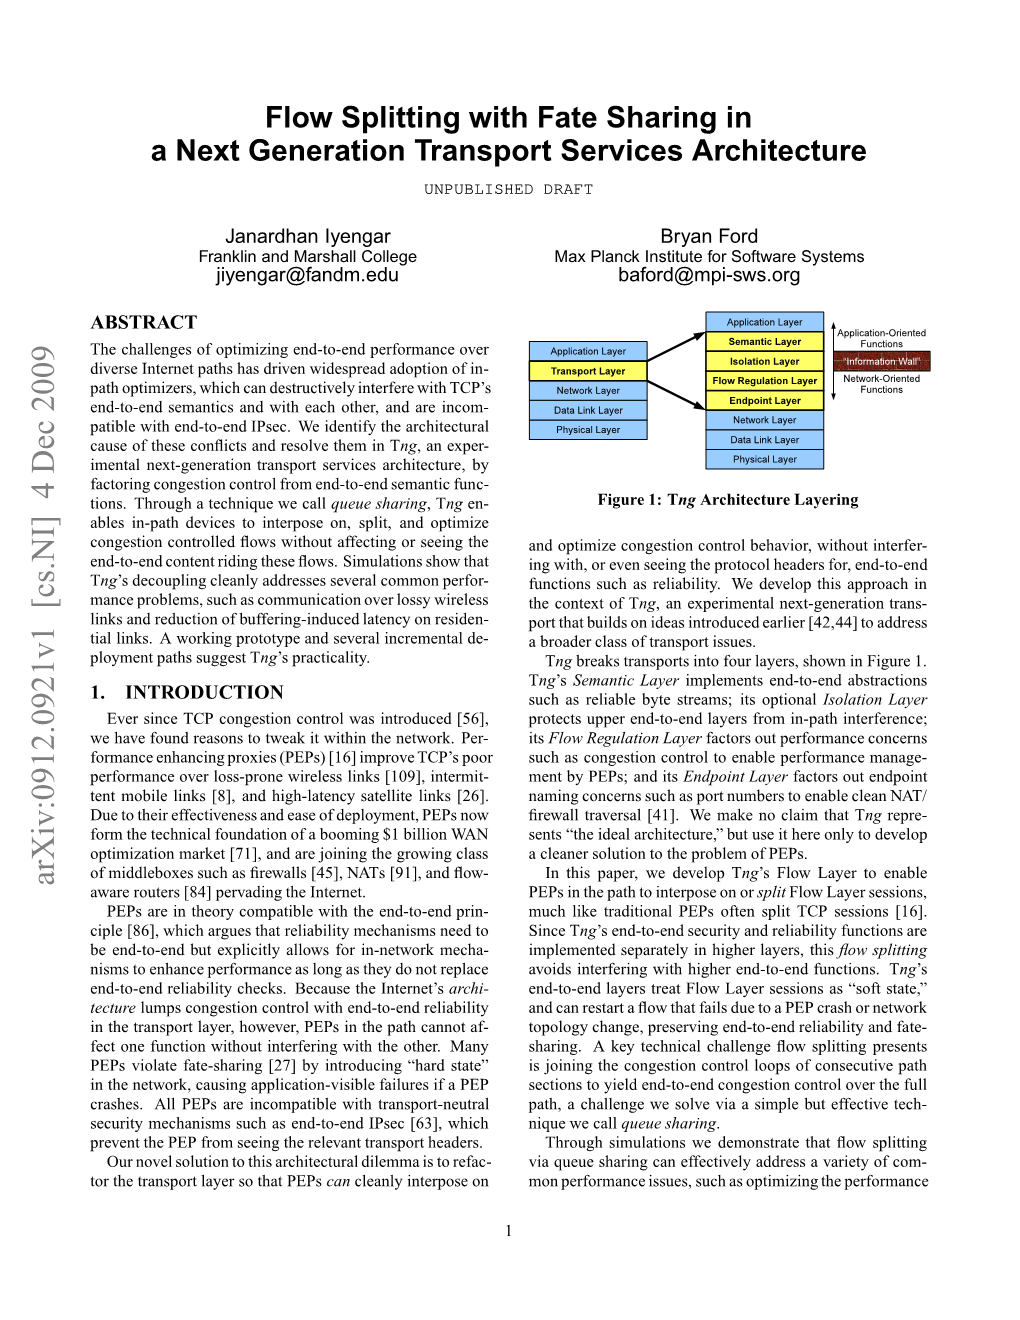 Flow Splitting with Fate Sharing in a Next Generation Transport Services Architecture